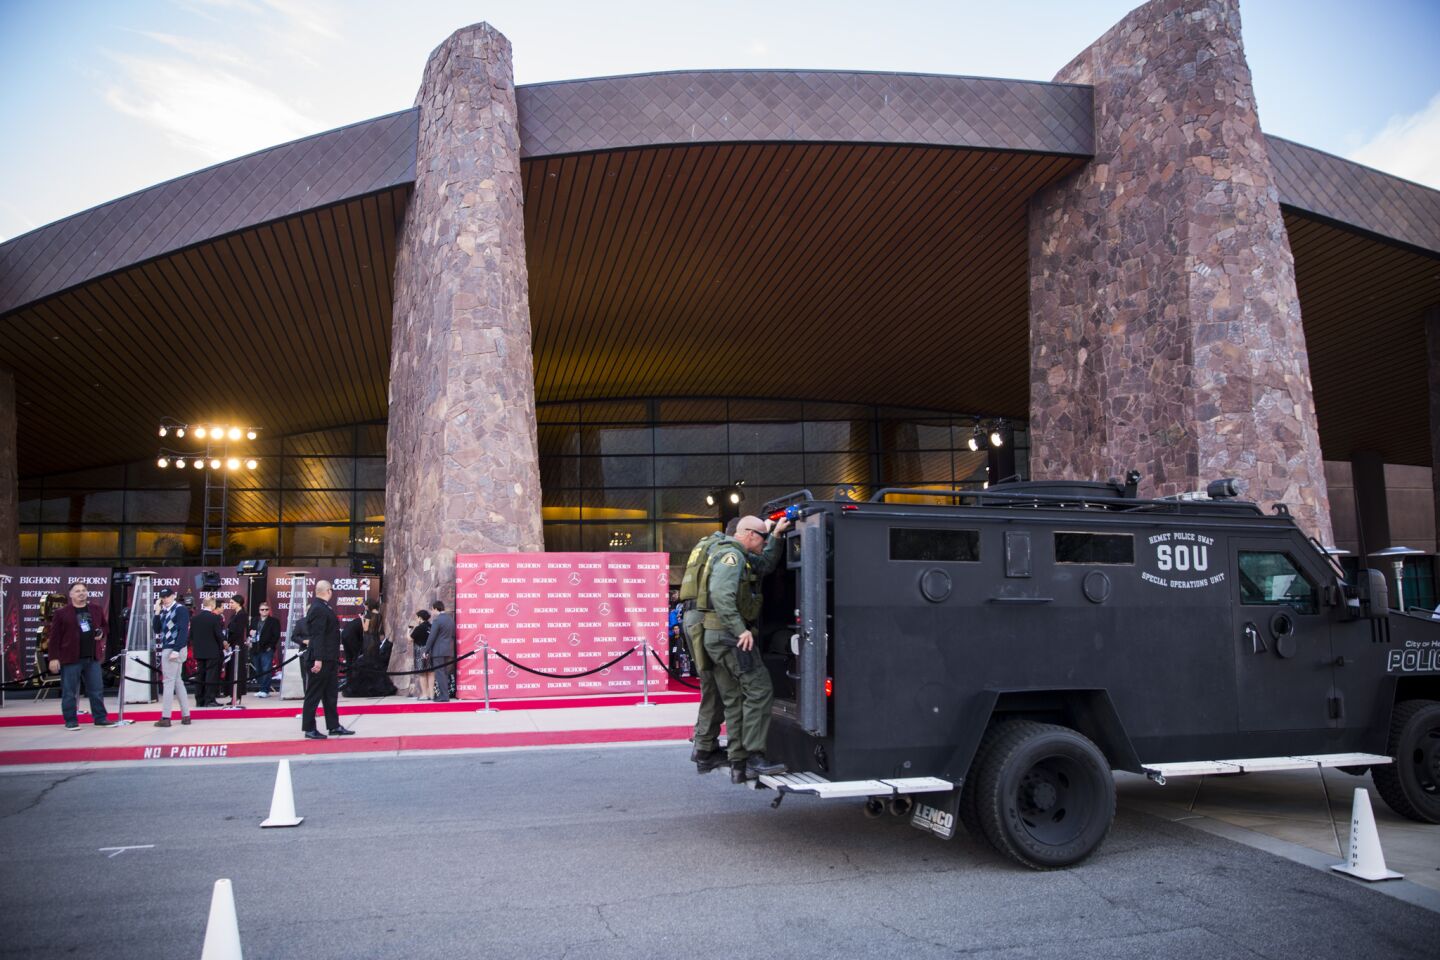 Security outside the Palm Springs Convention Center before the start of the gala.